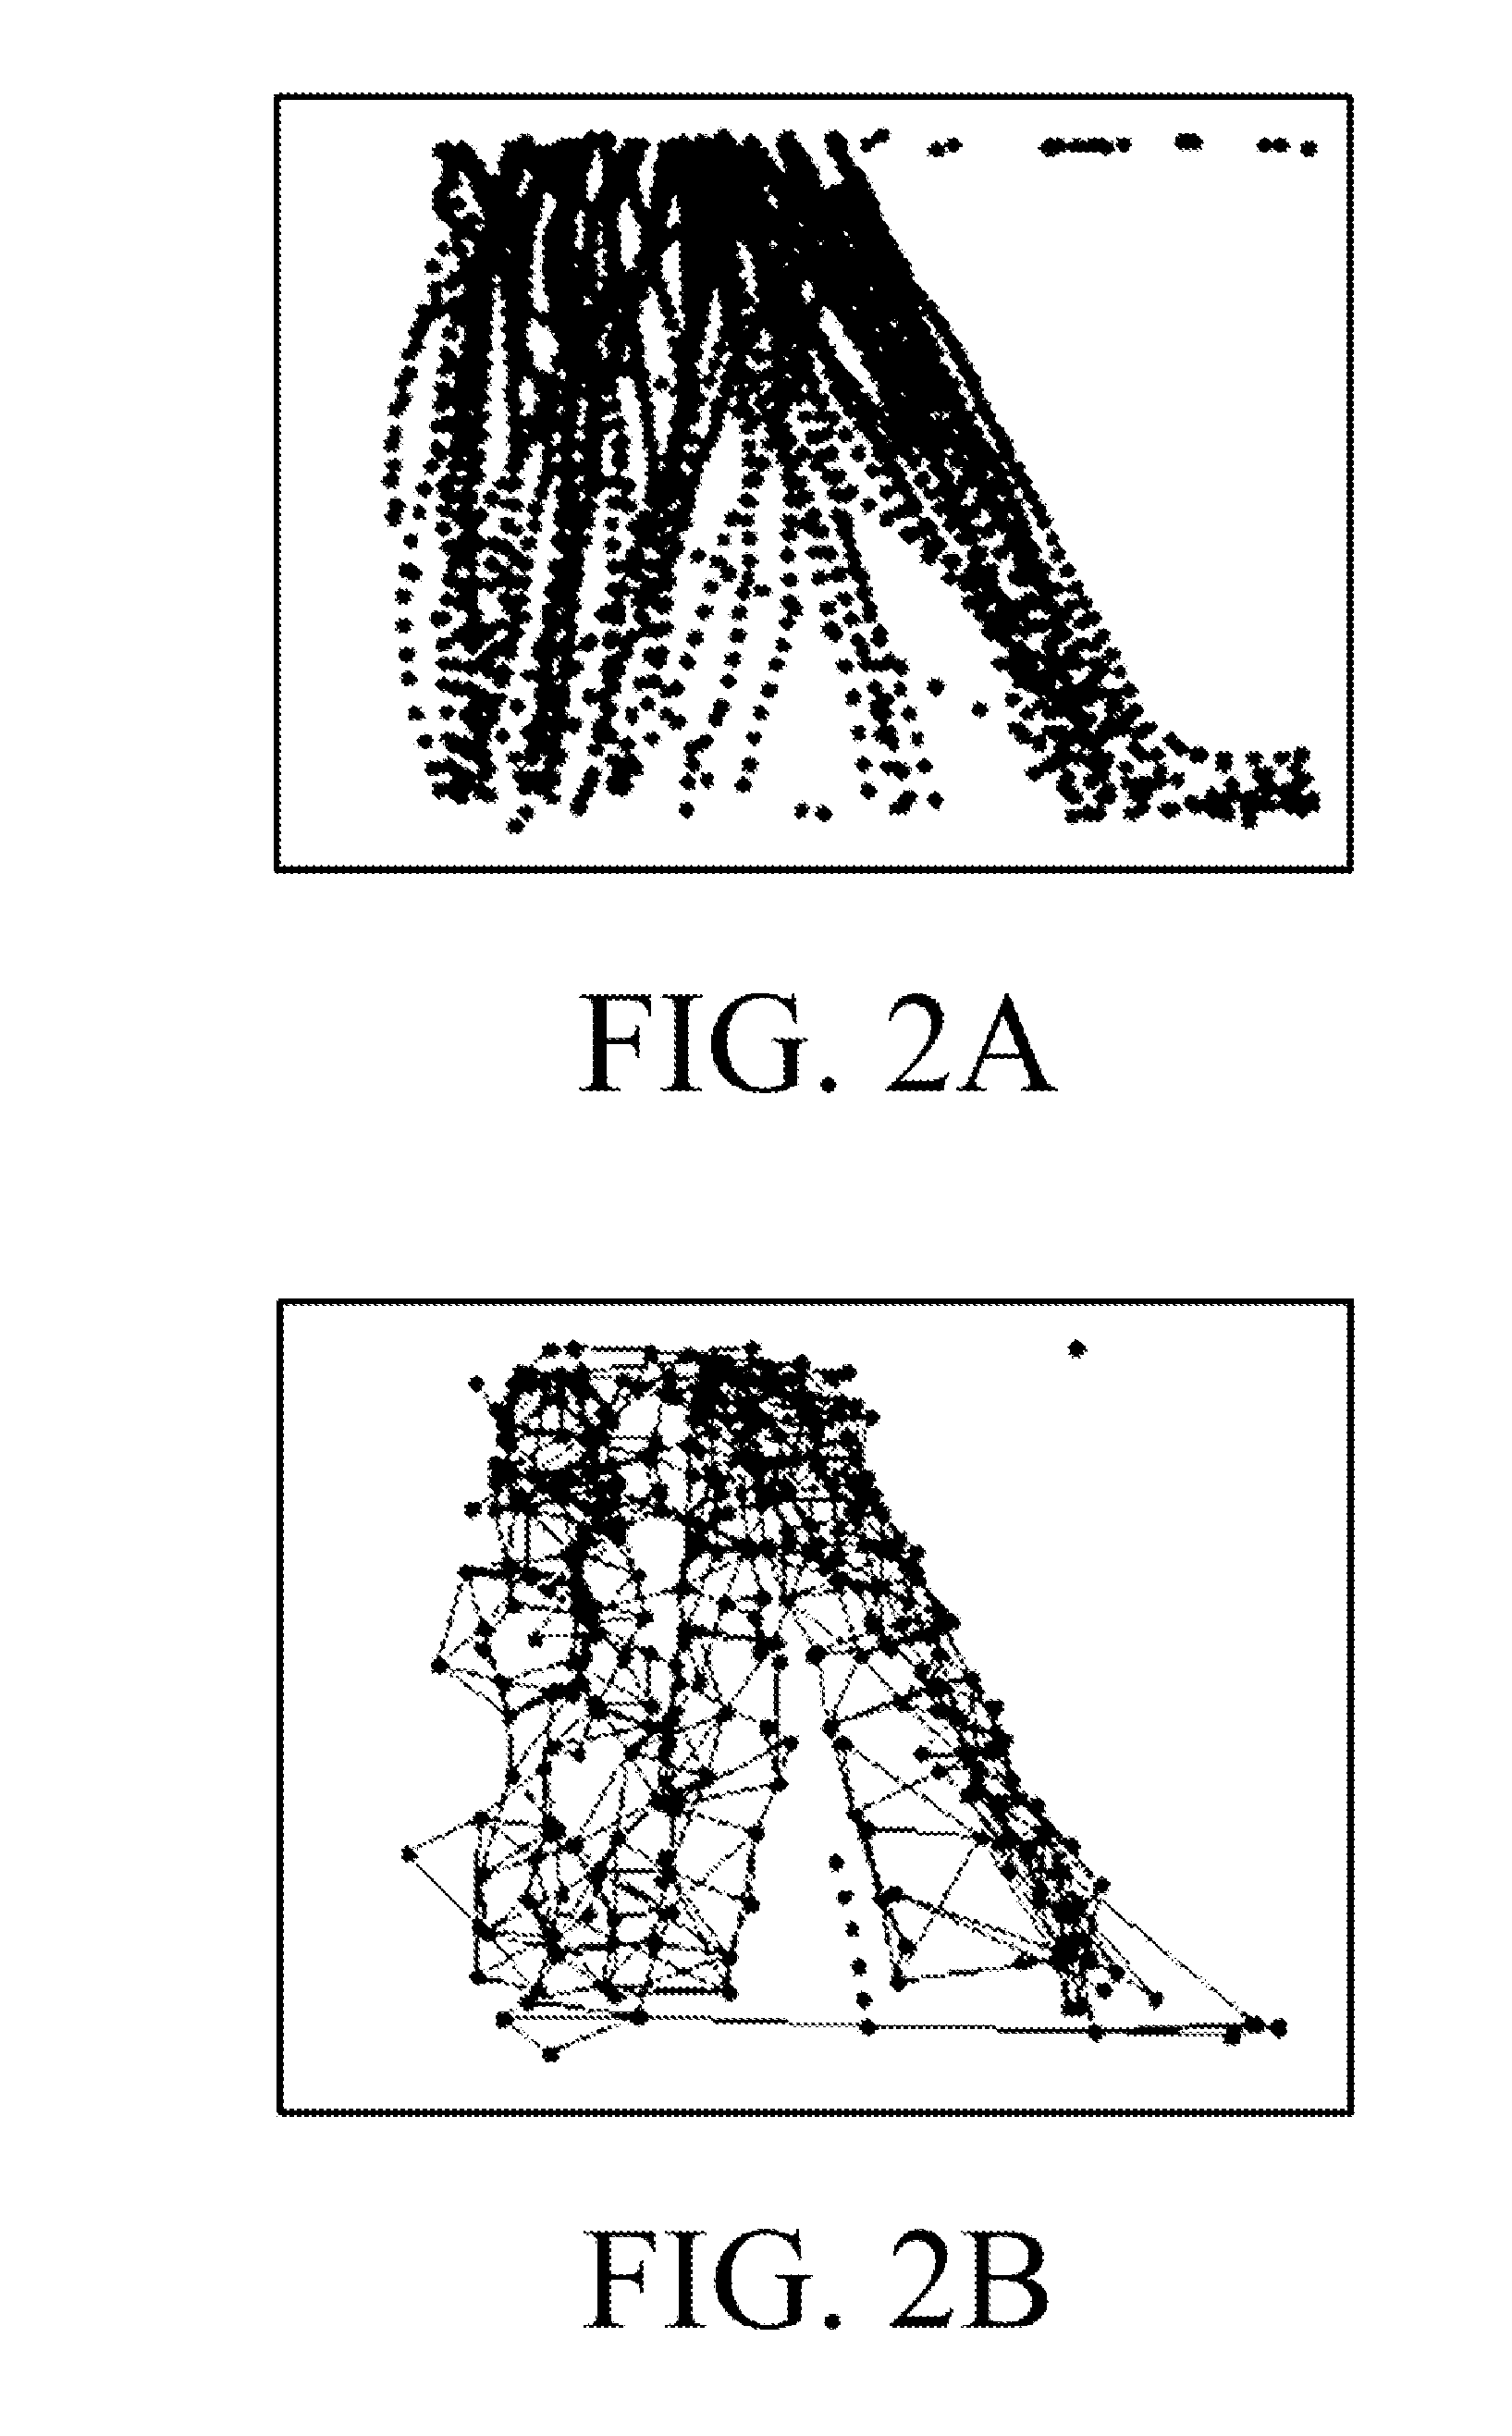 Method for compressing a video and a system thereof